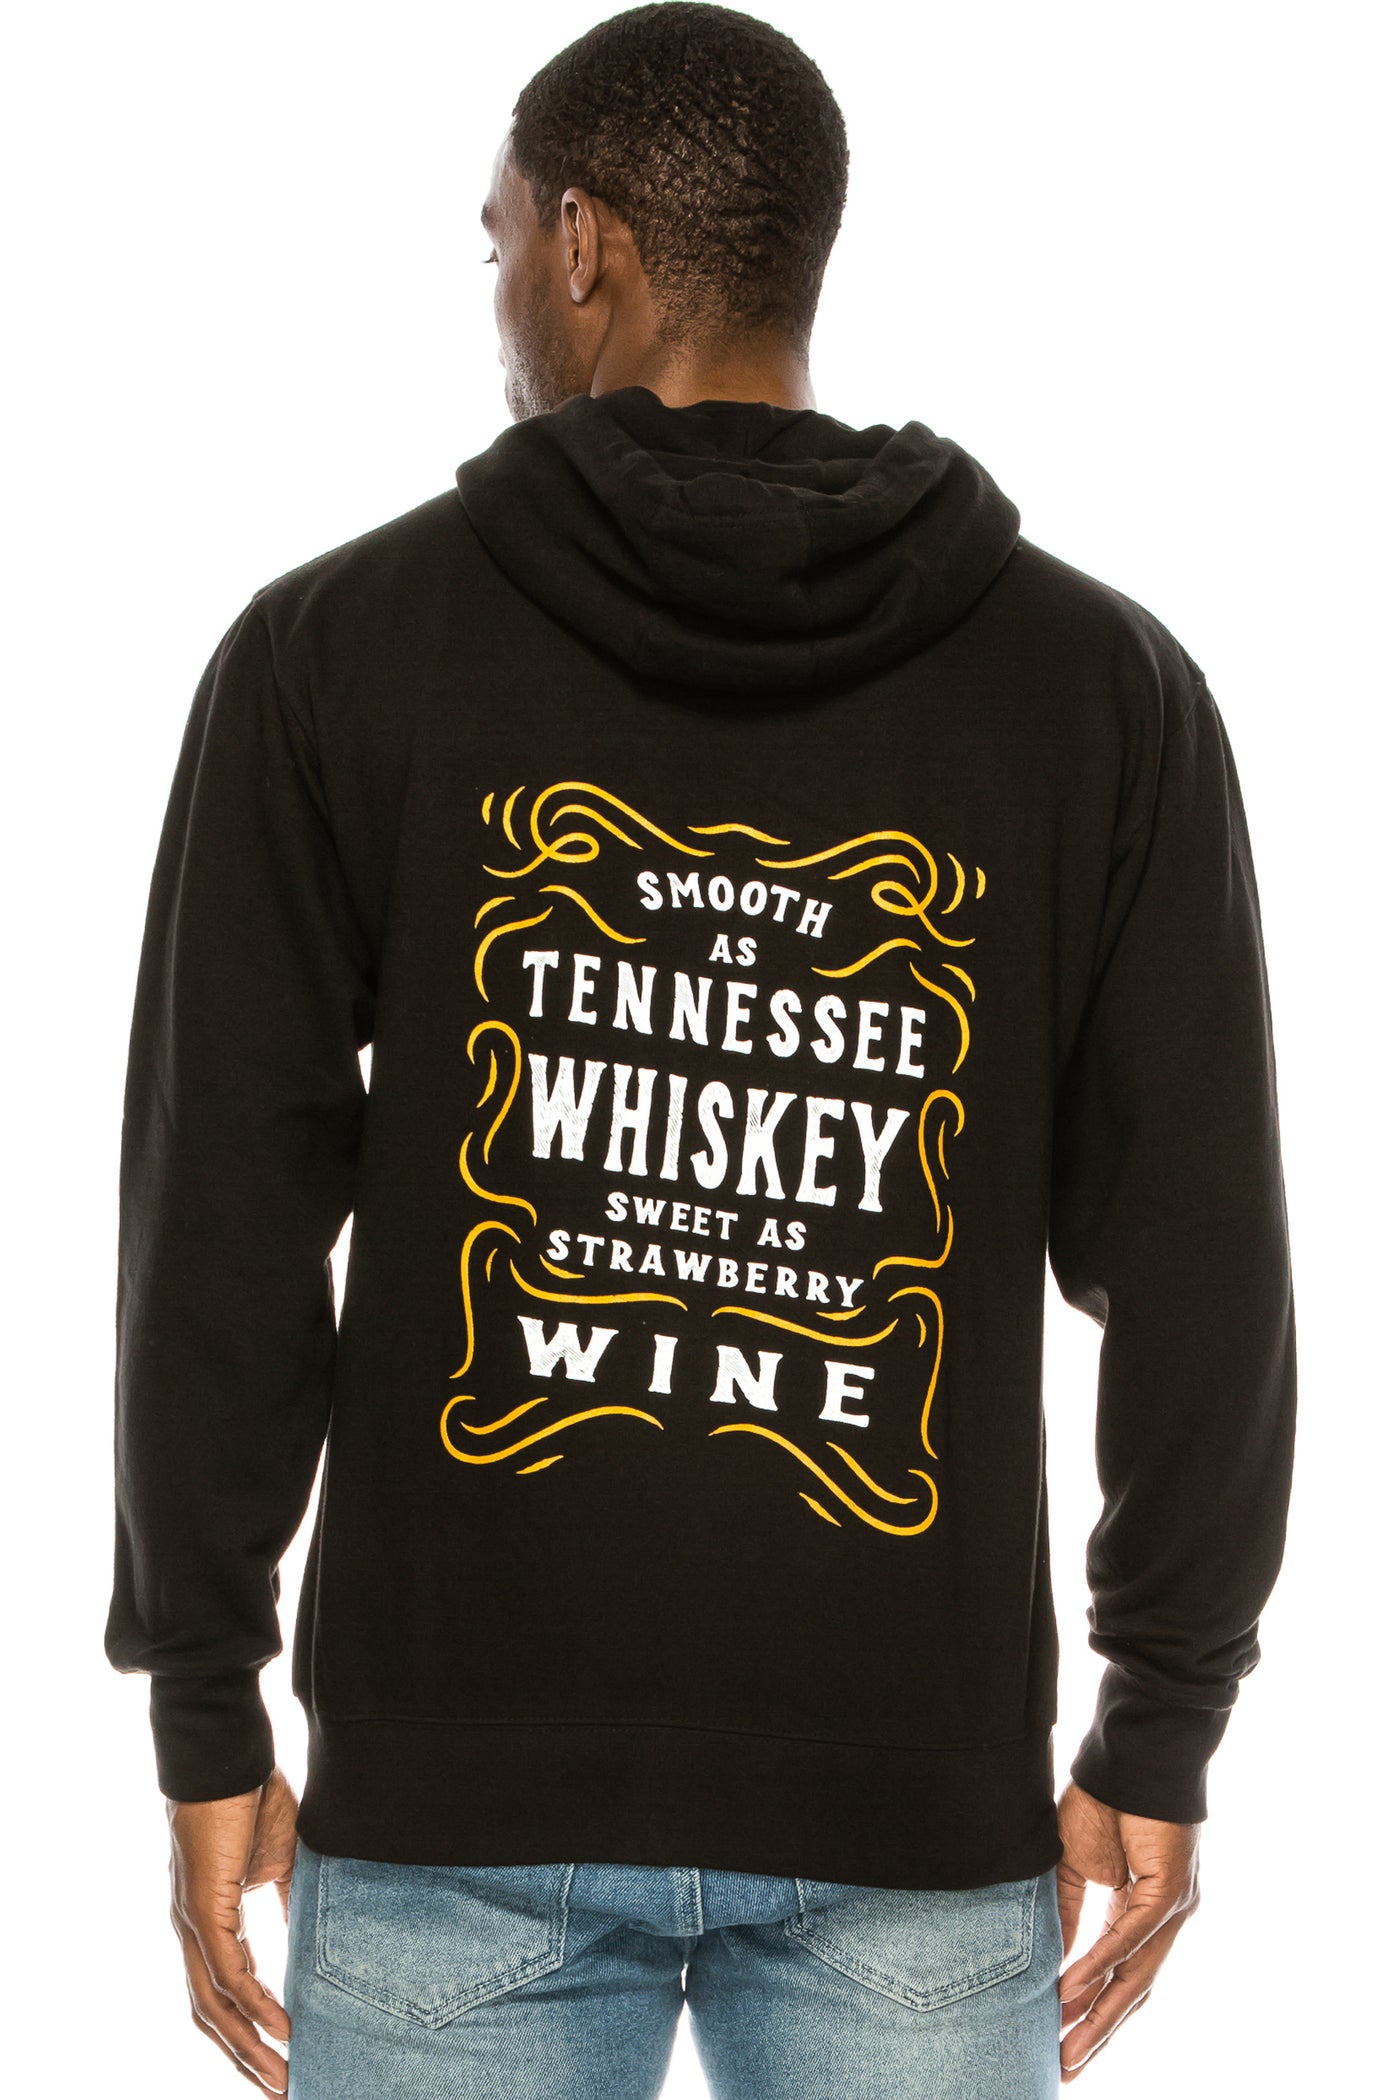 SMOOTH AS TENNESSEE WHISKEY ZIP HOODIE - Trailsclothing.com